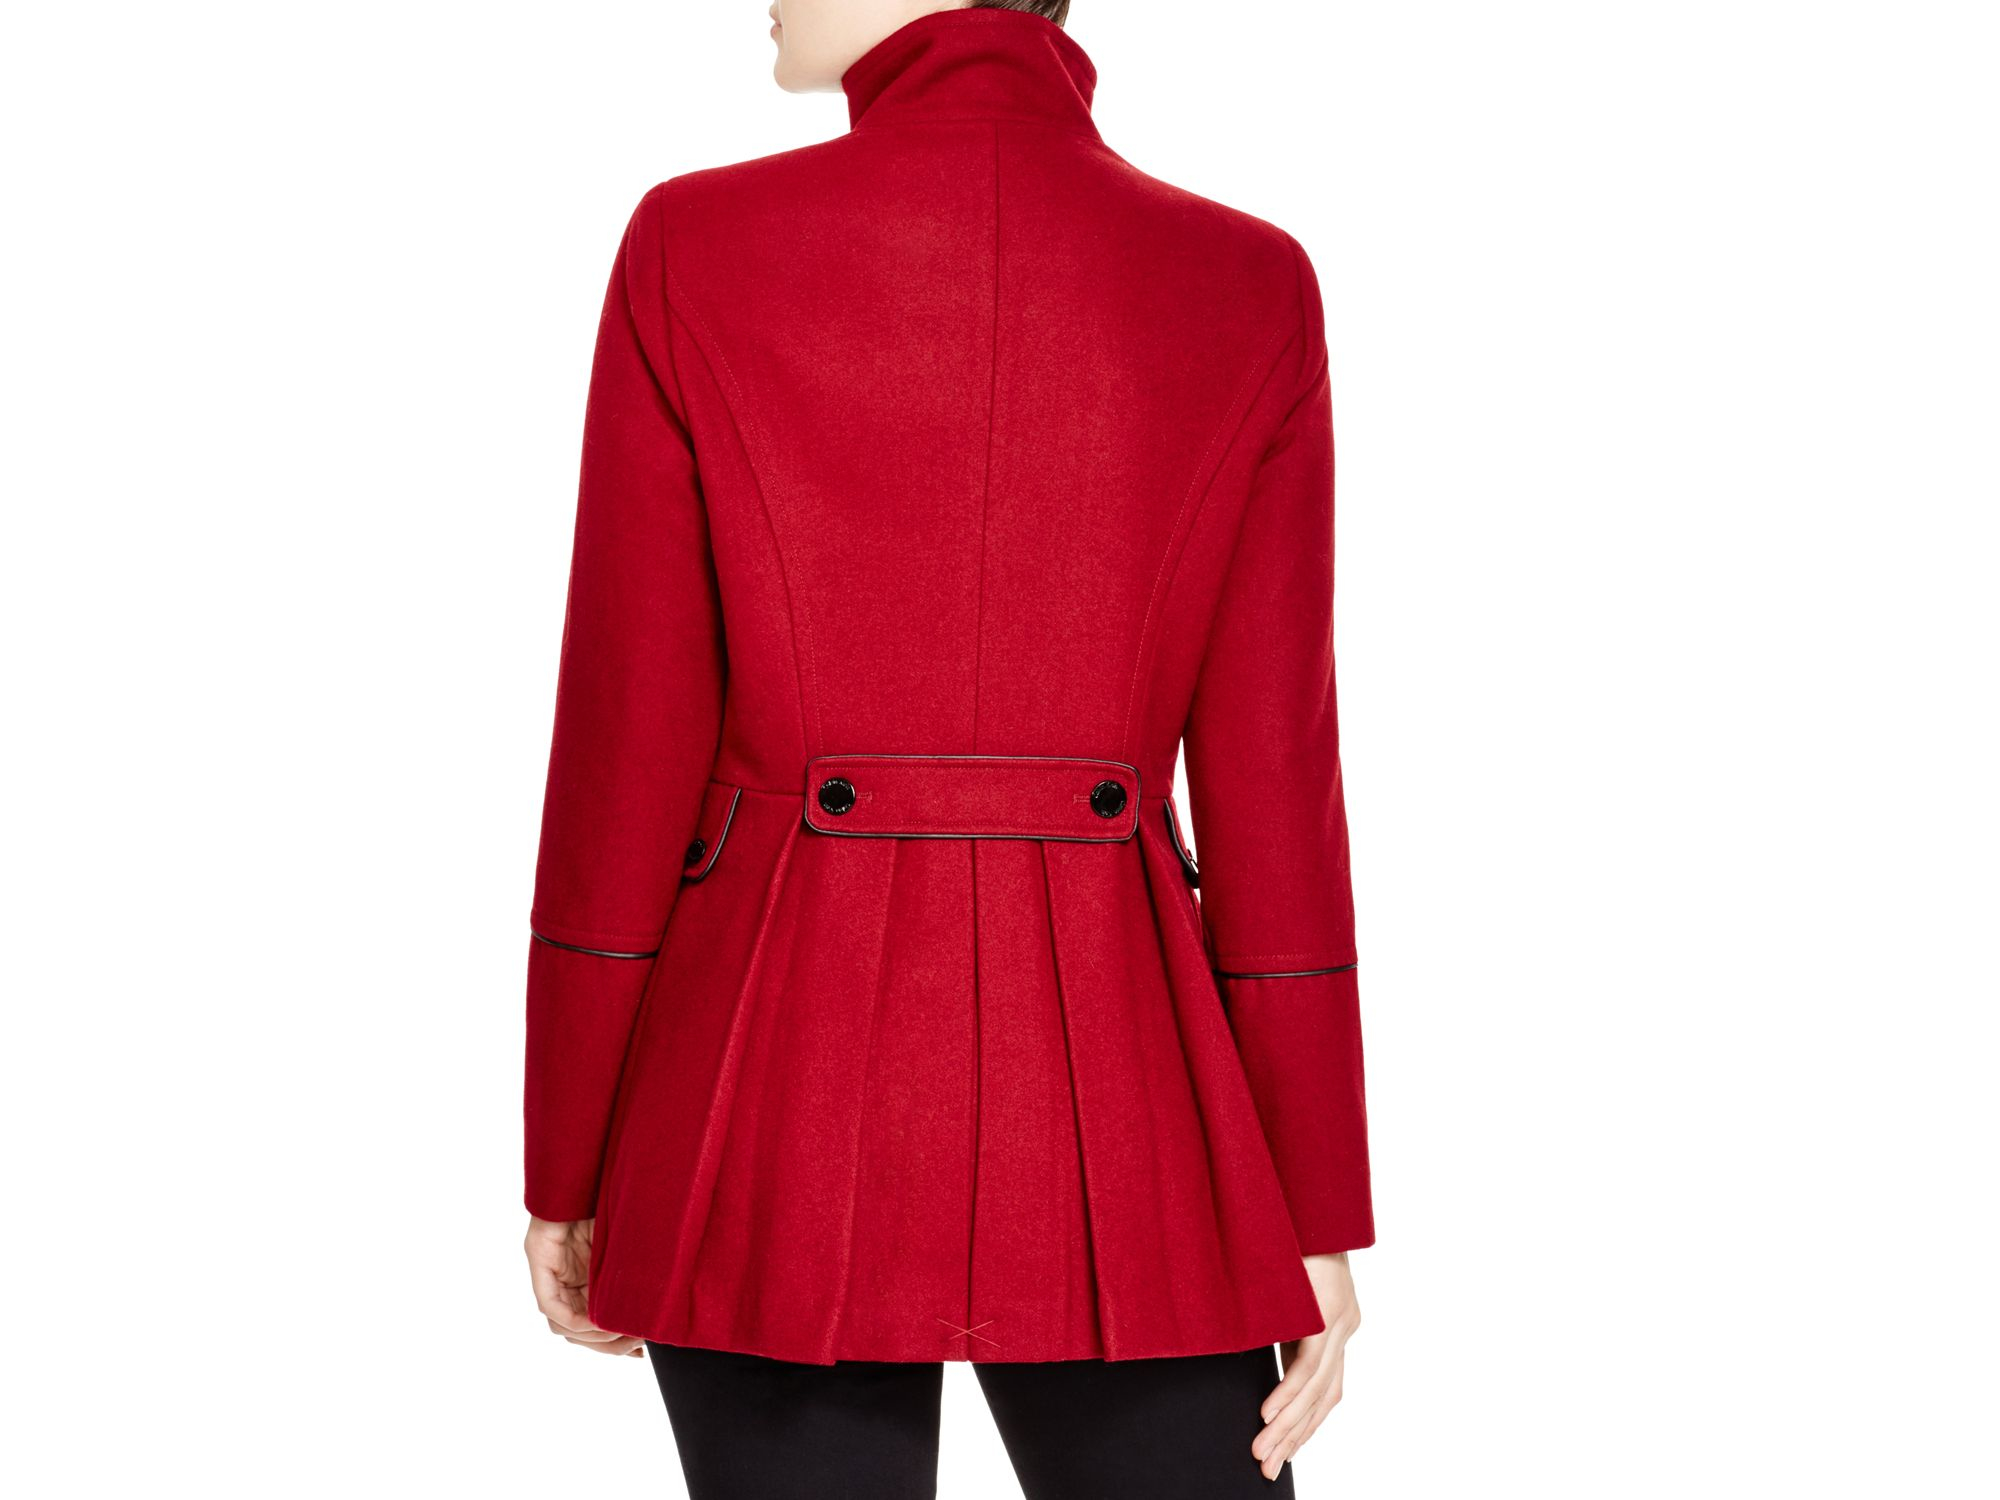 Calvin Klein Military Style Pea Coat in Red - Lyst